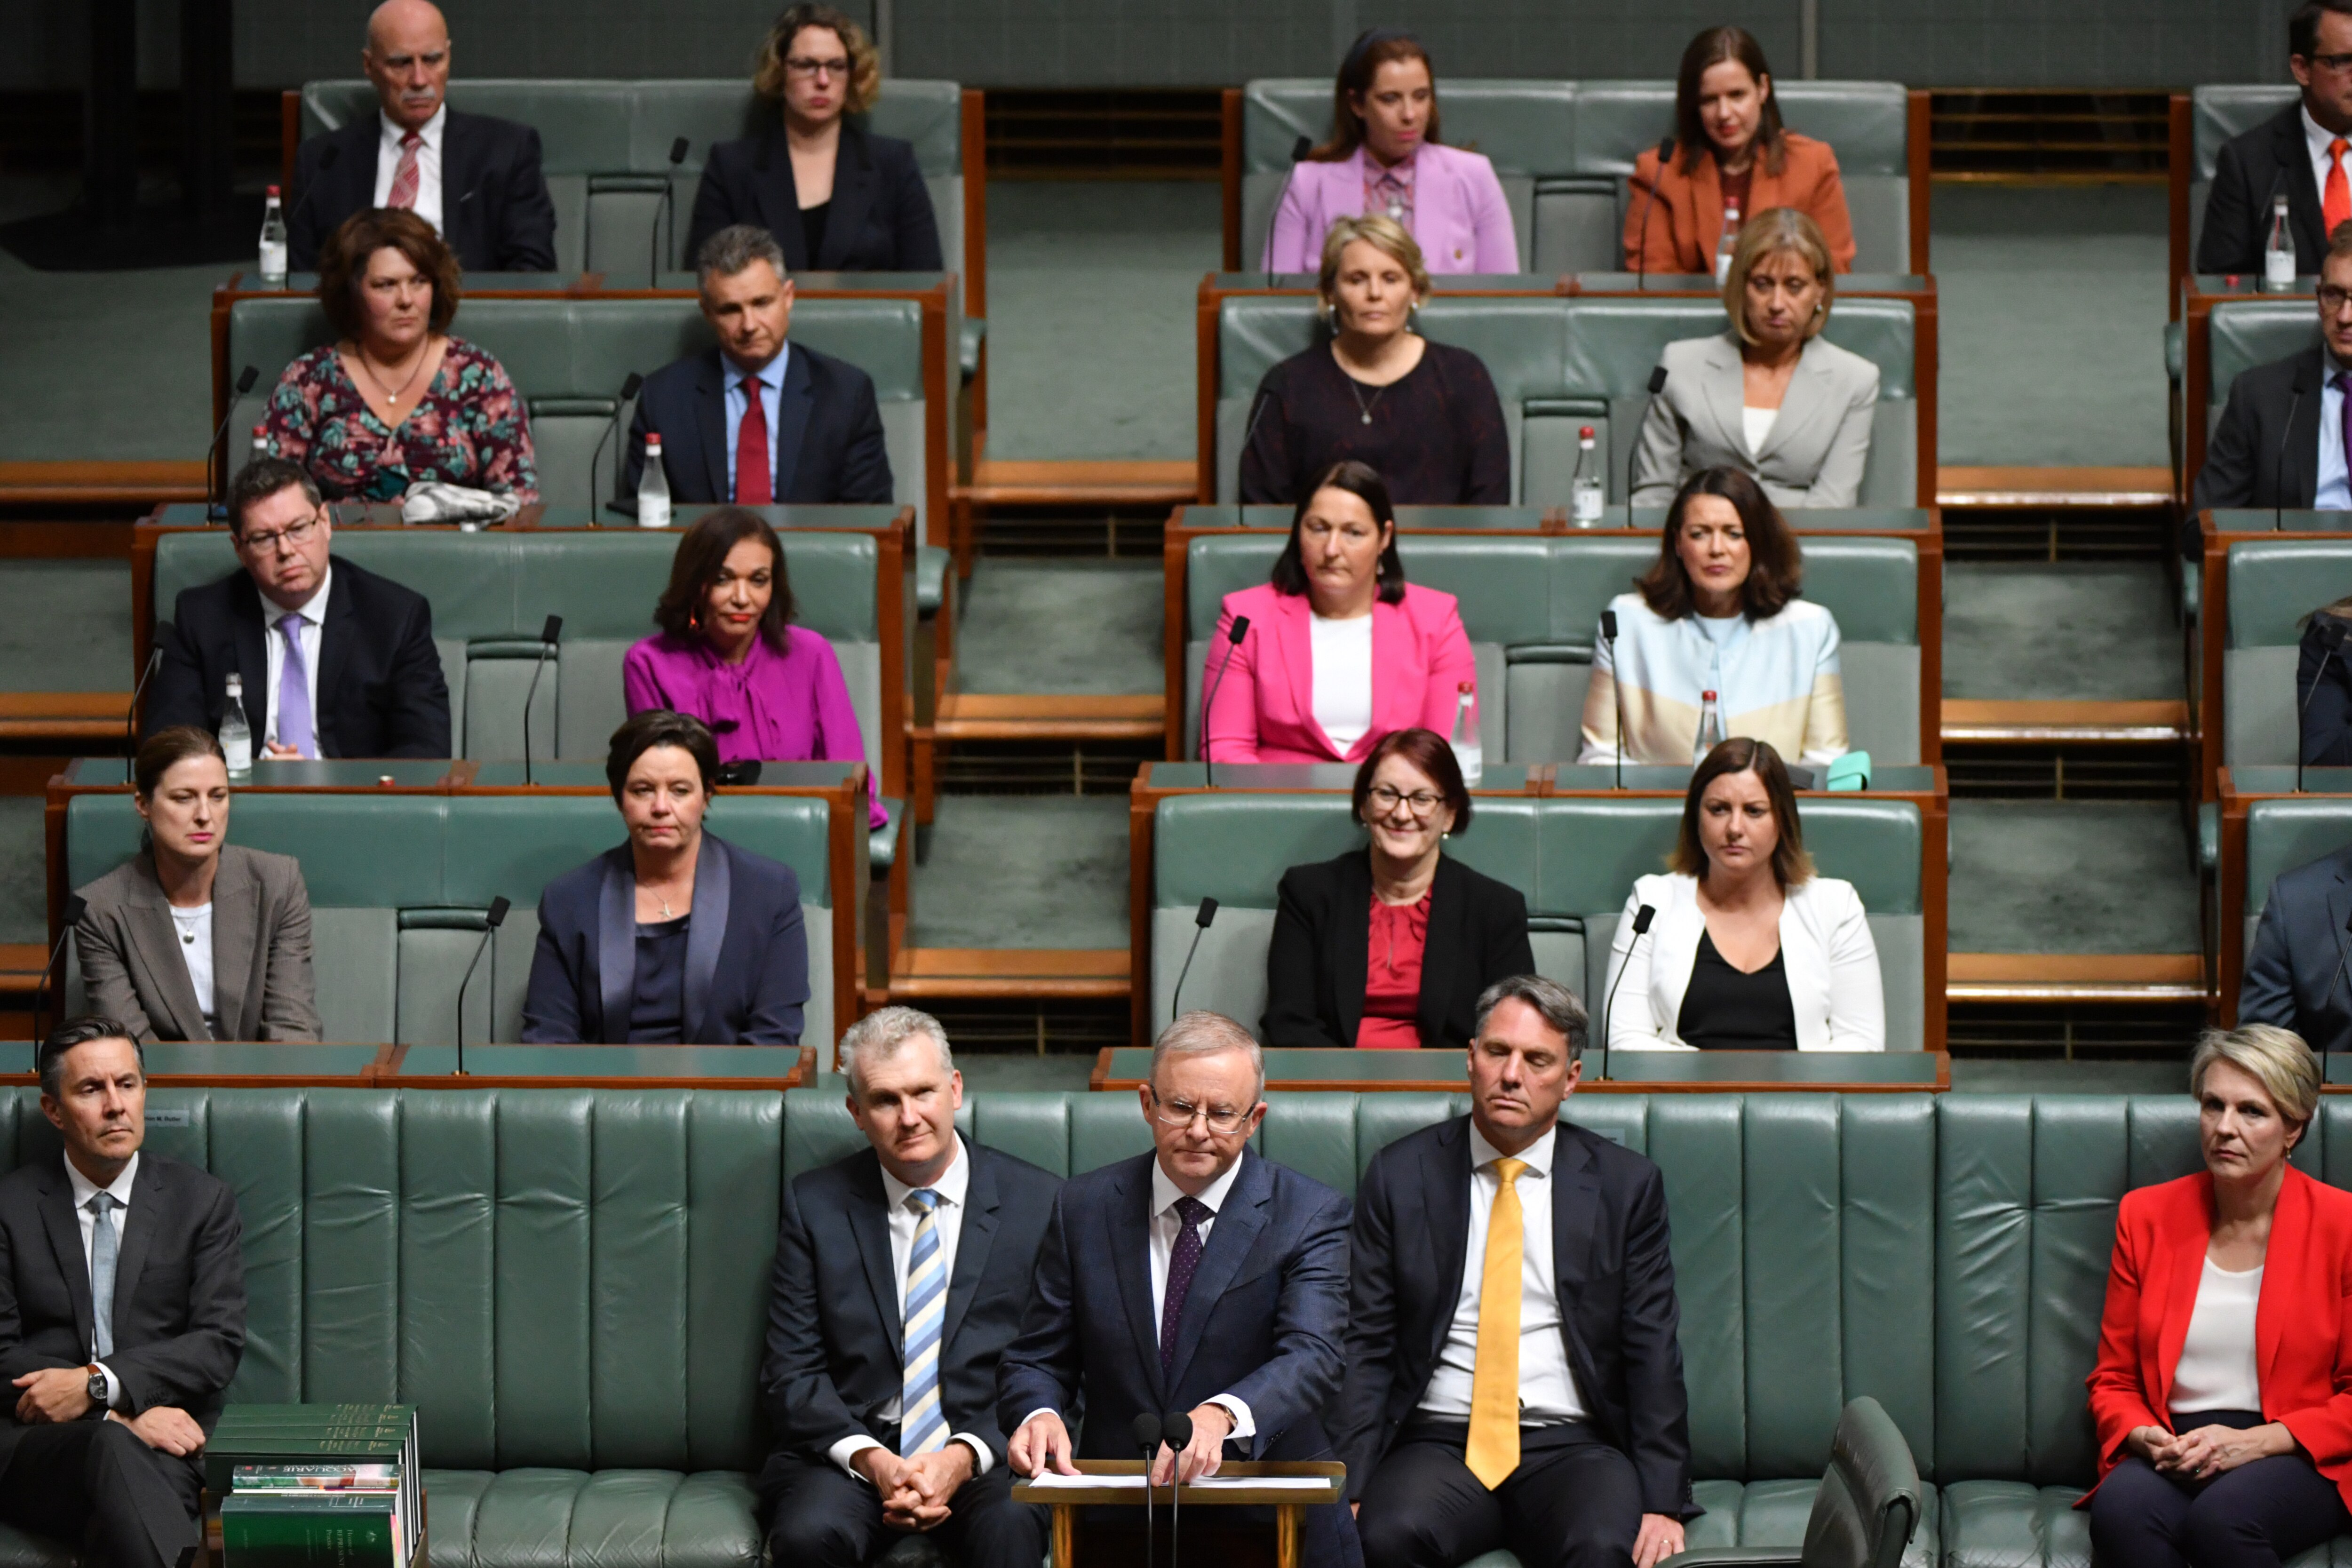 Leader of the Opposition Anthony Albanese makes his budget reply speech in Canberra, Thursday, 13 May, 2021.